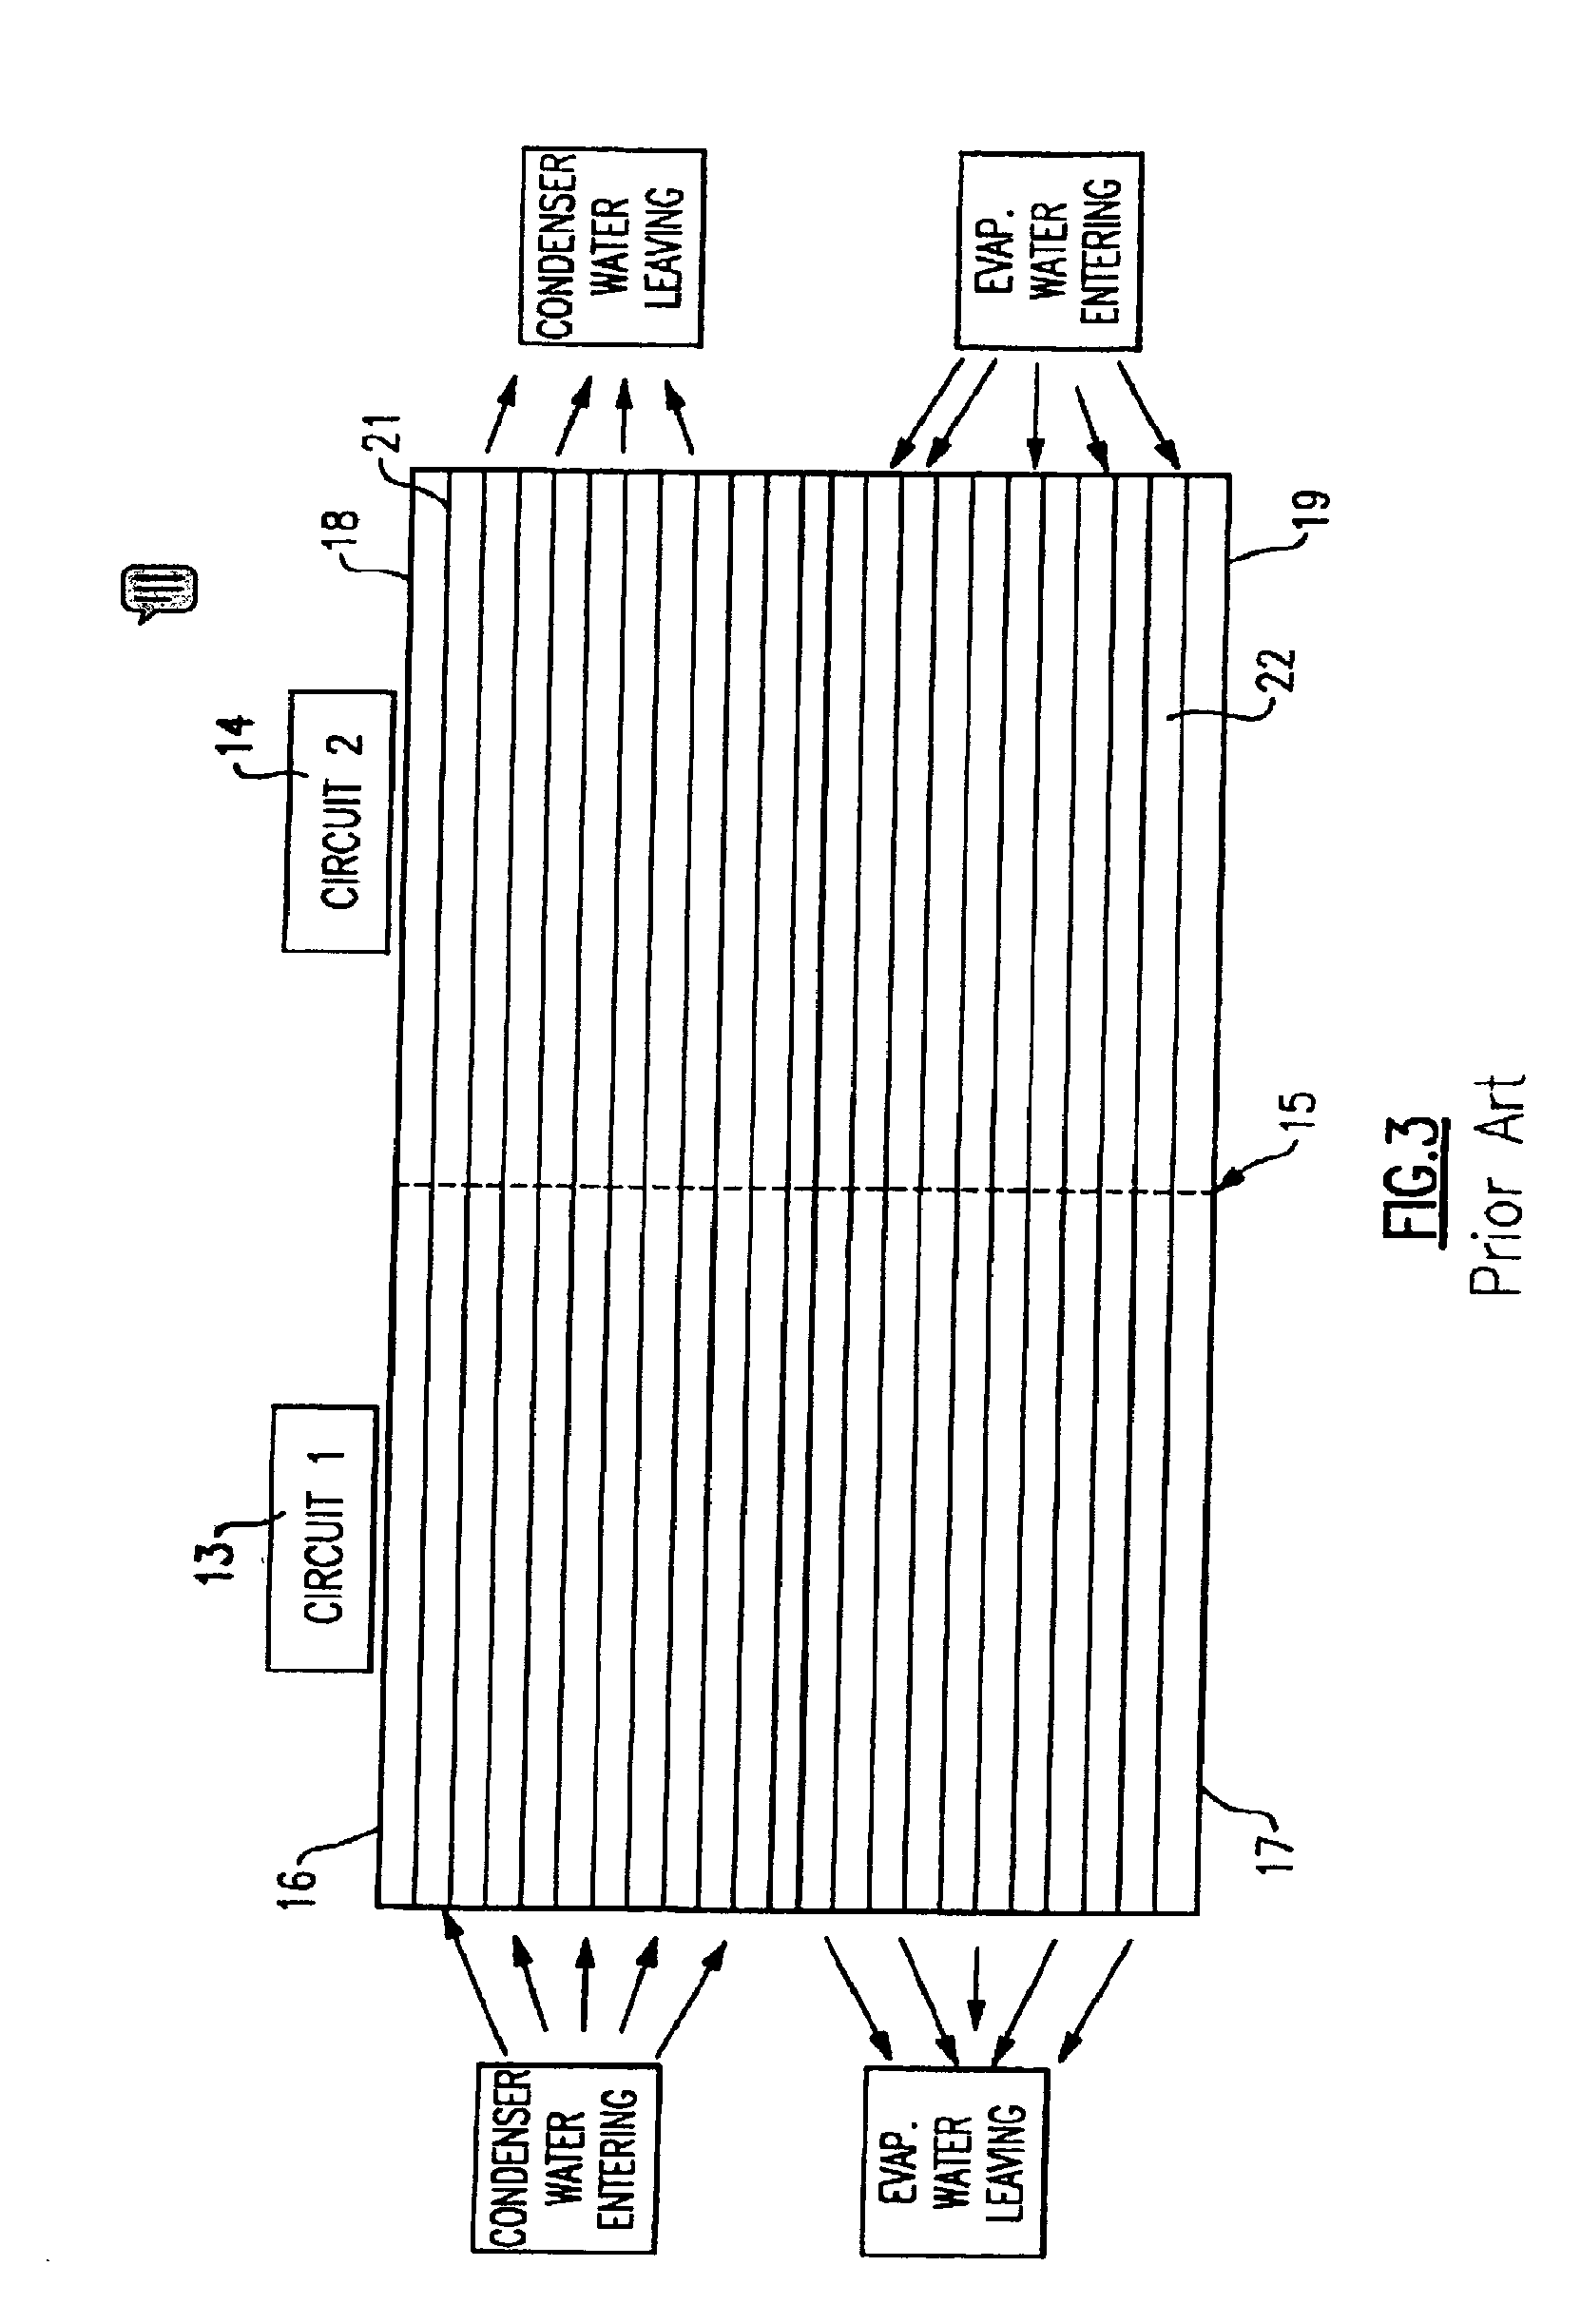 Dual-circuit chiller with two-pass heat exchanger in a series counterflow arrangement